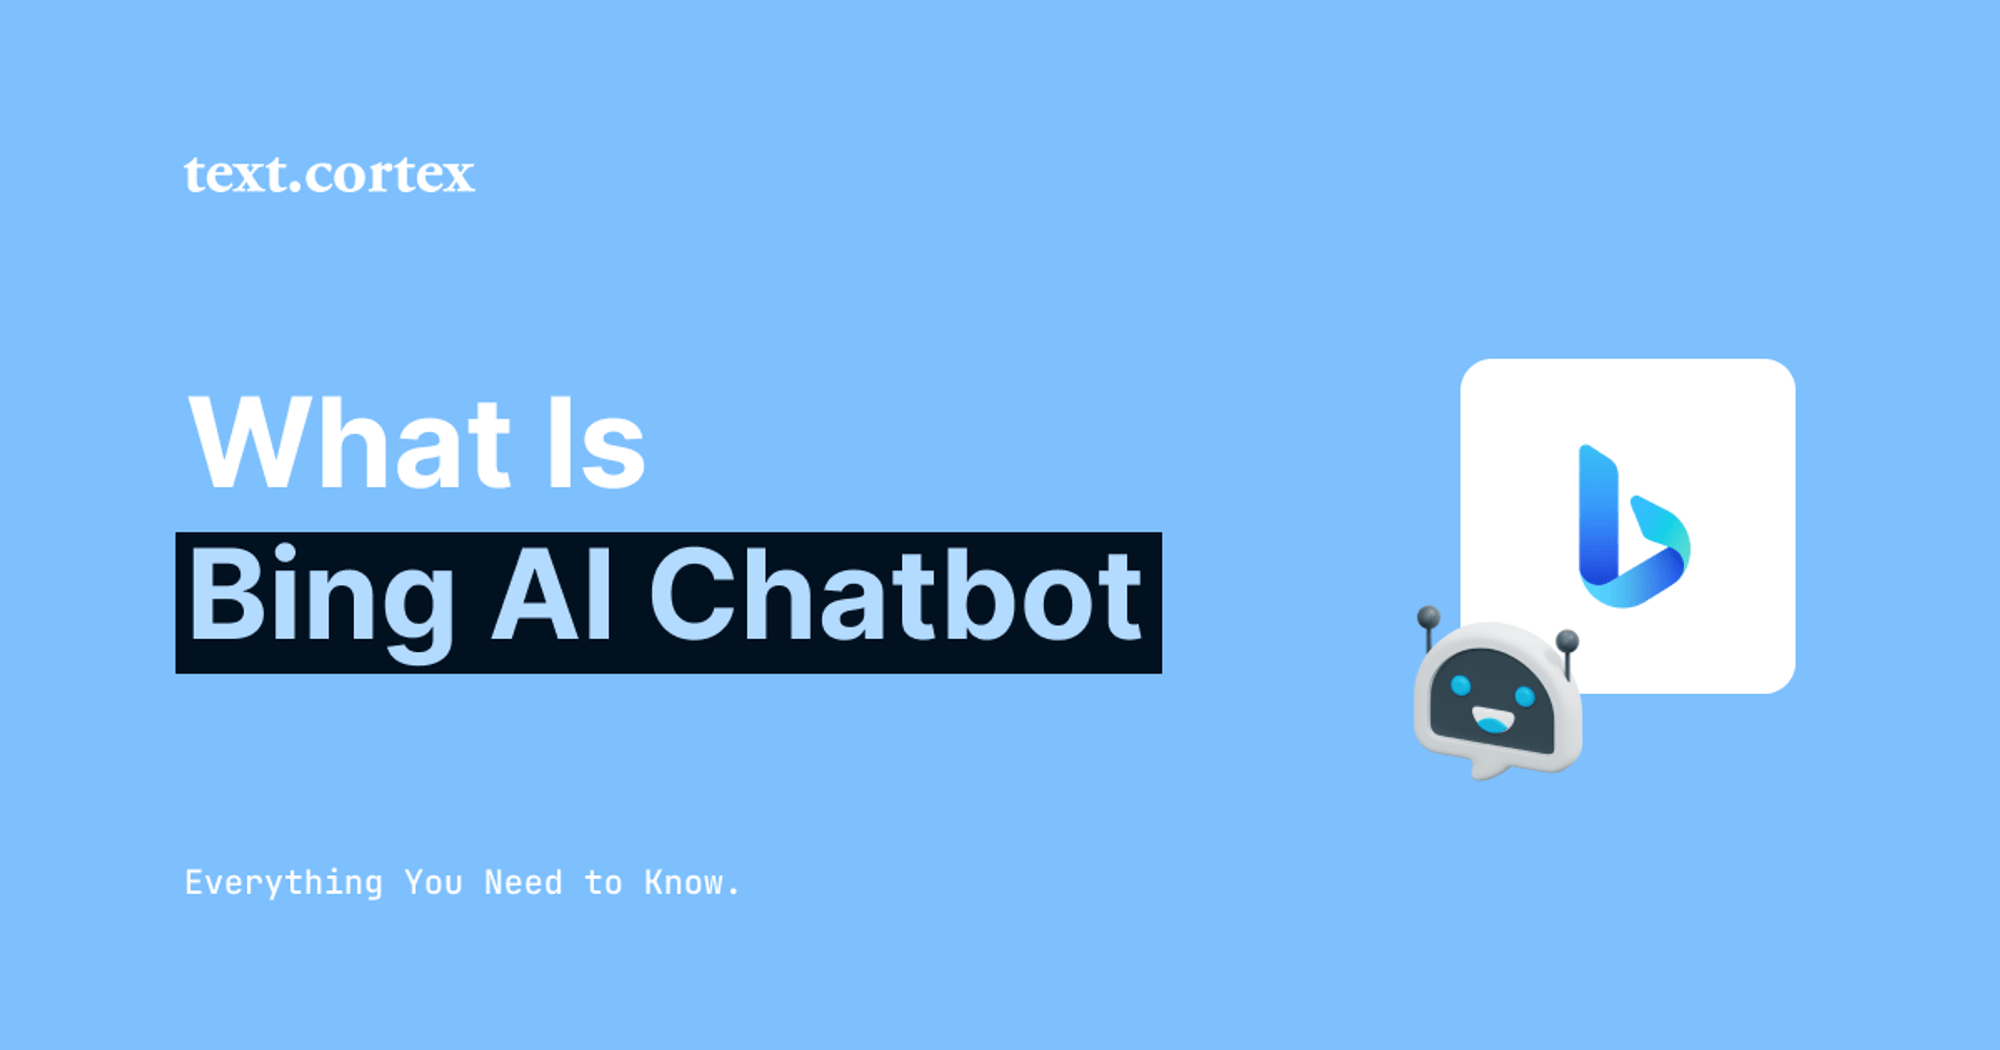 What Is Bing AI Chatbot - Everything You Need to Know